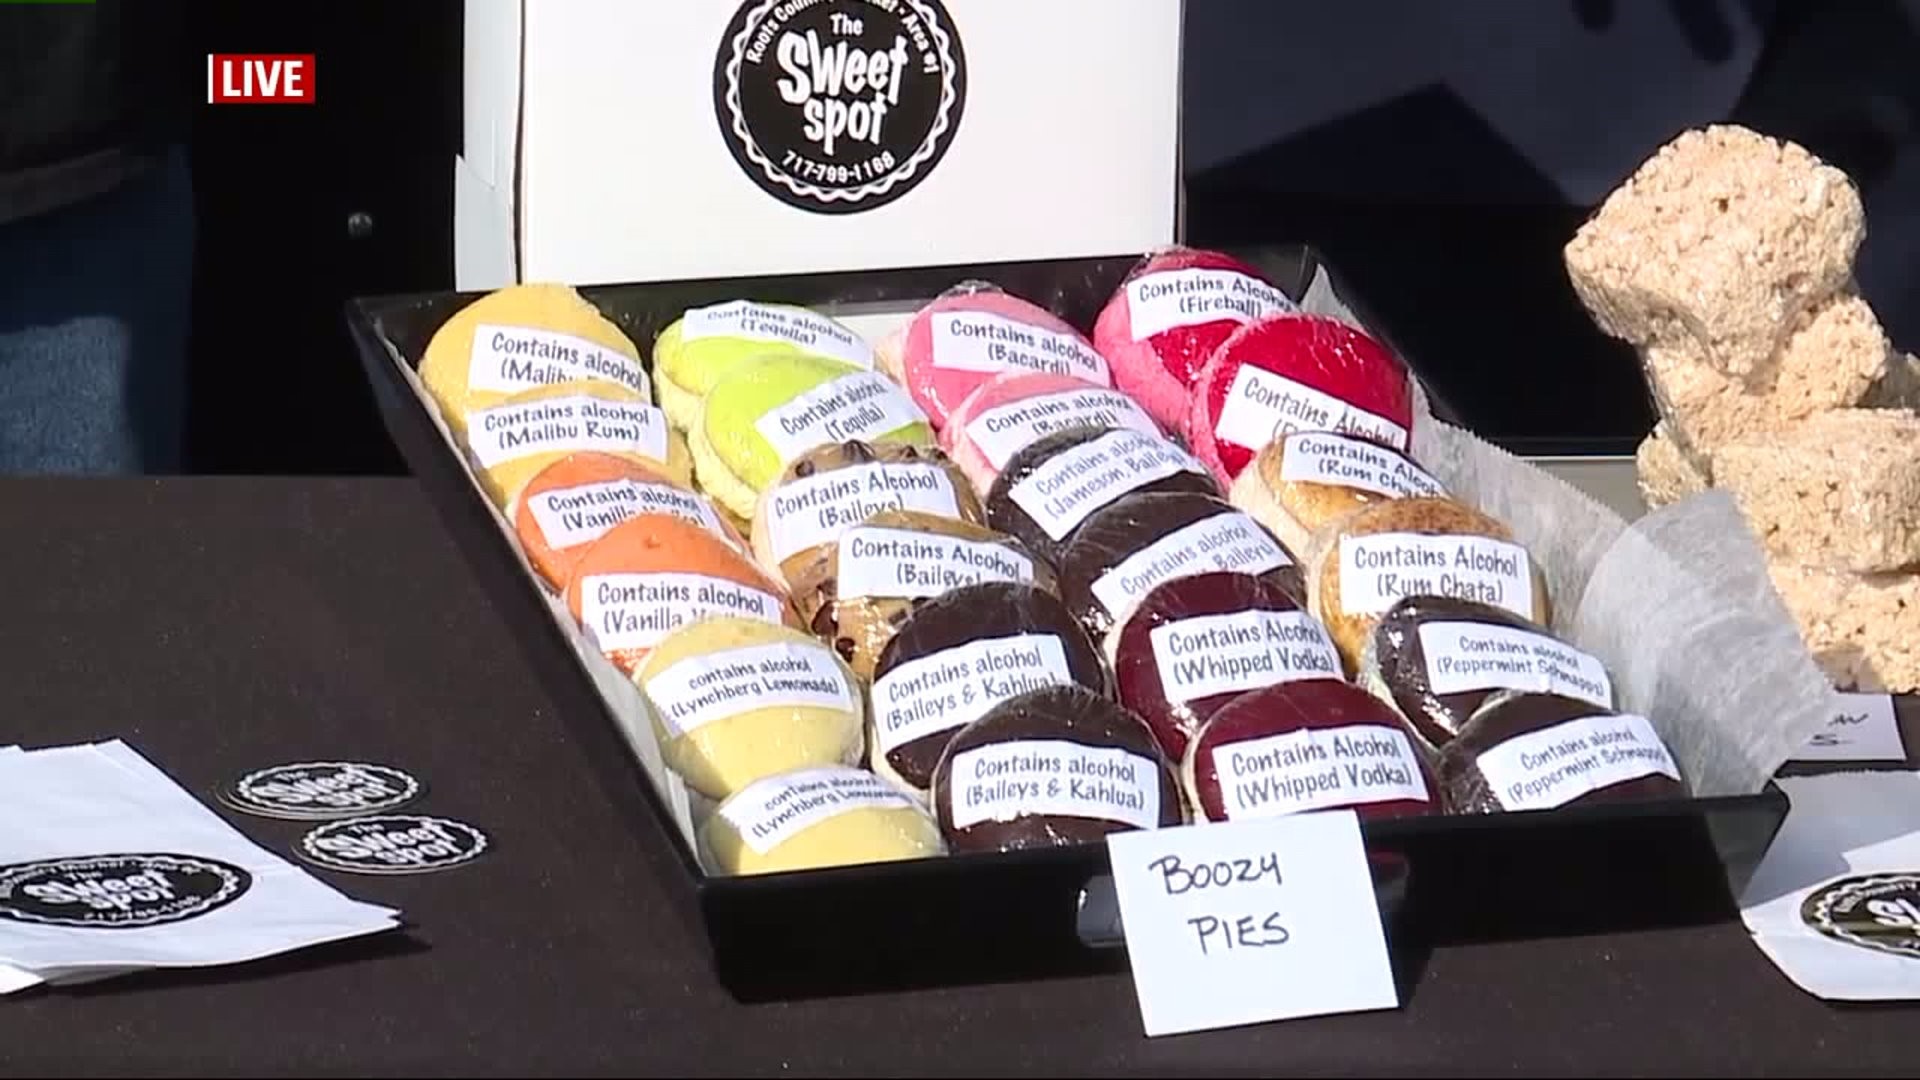 The Sweet Spot Food Truck puts a new spin on old treat with "boozy" whoopie pies